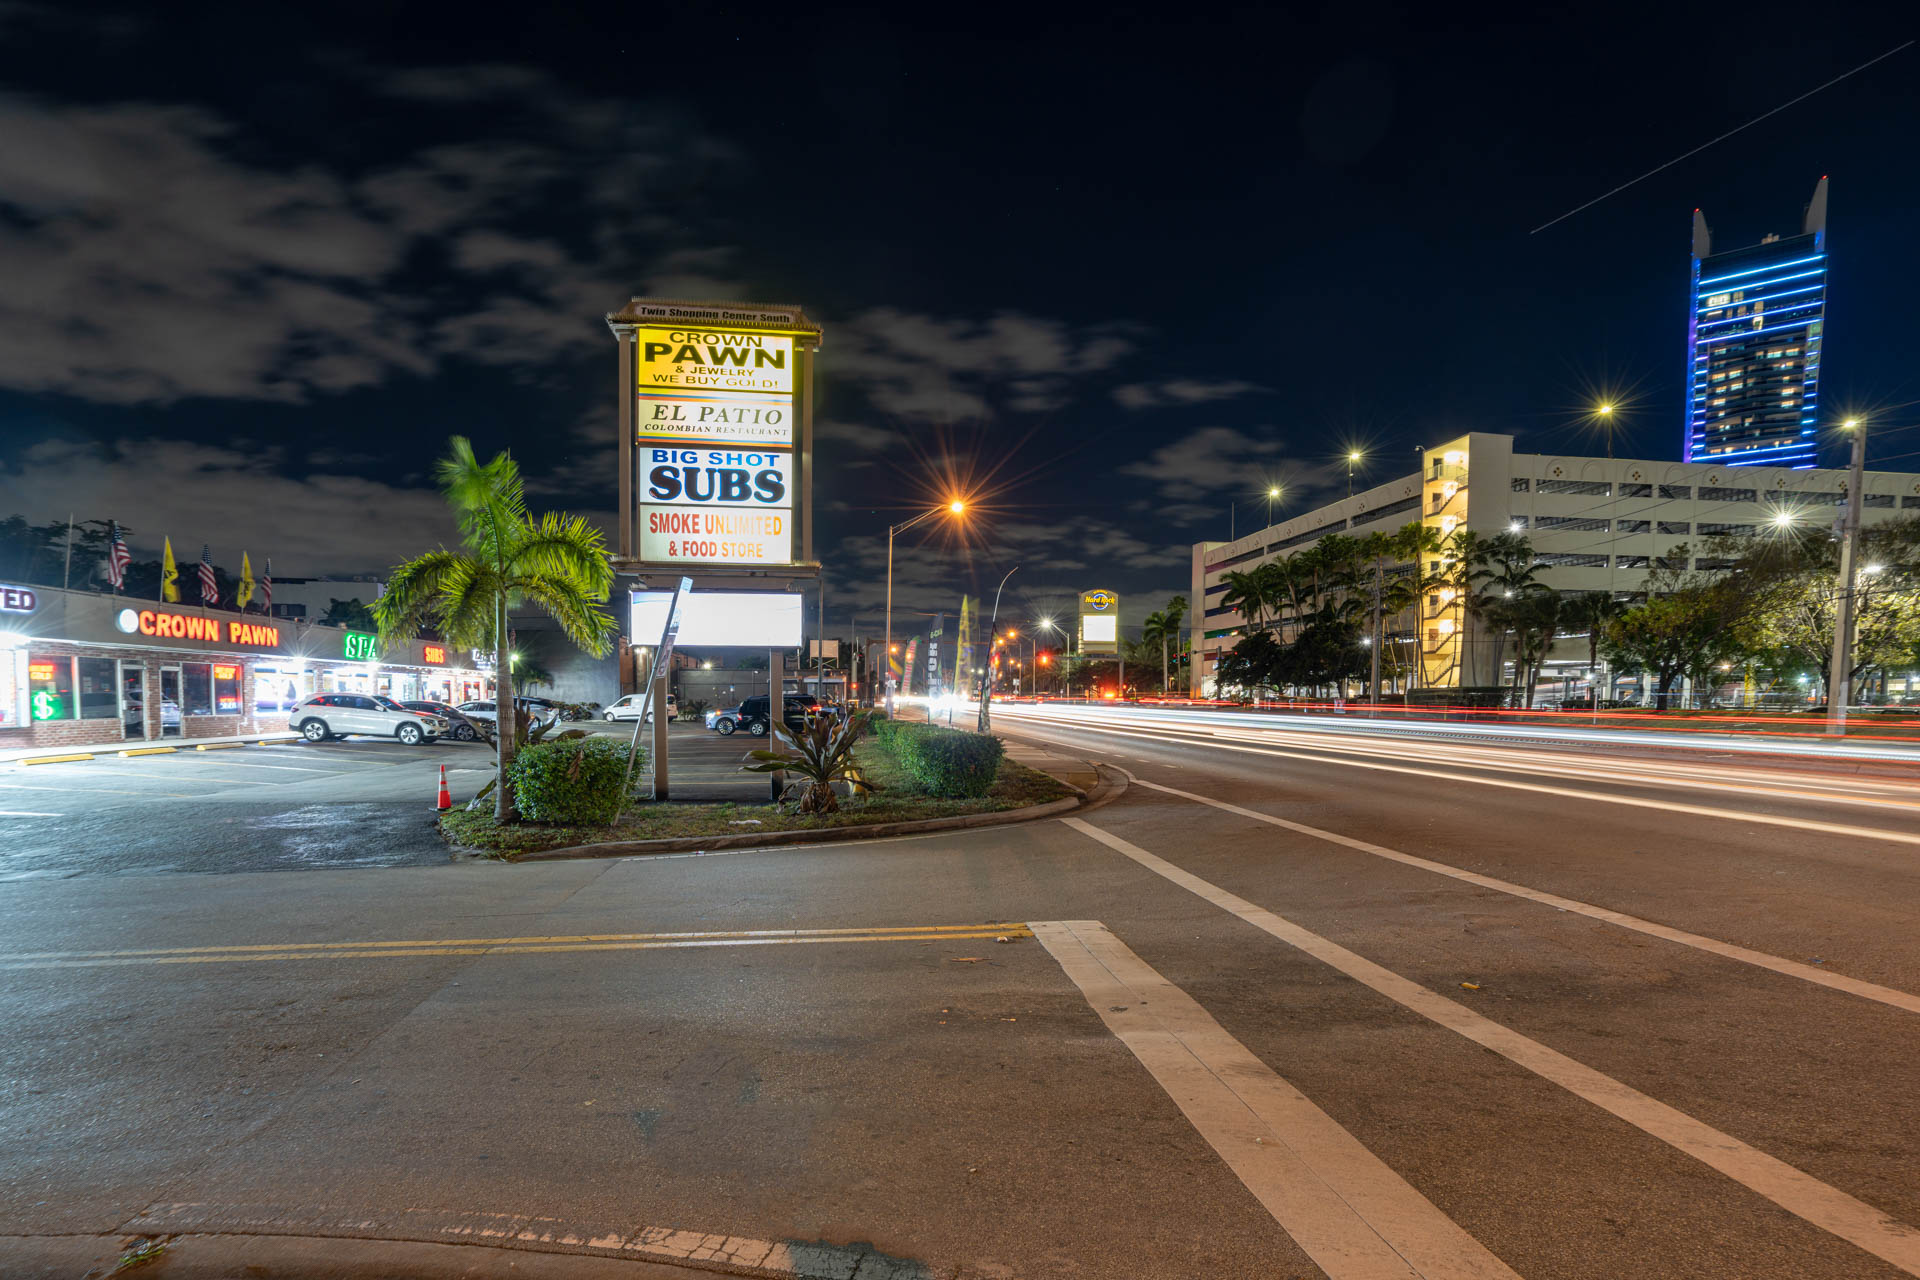 Twin Shopping Center - South at night